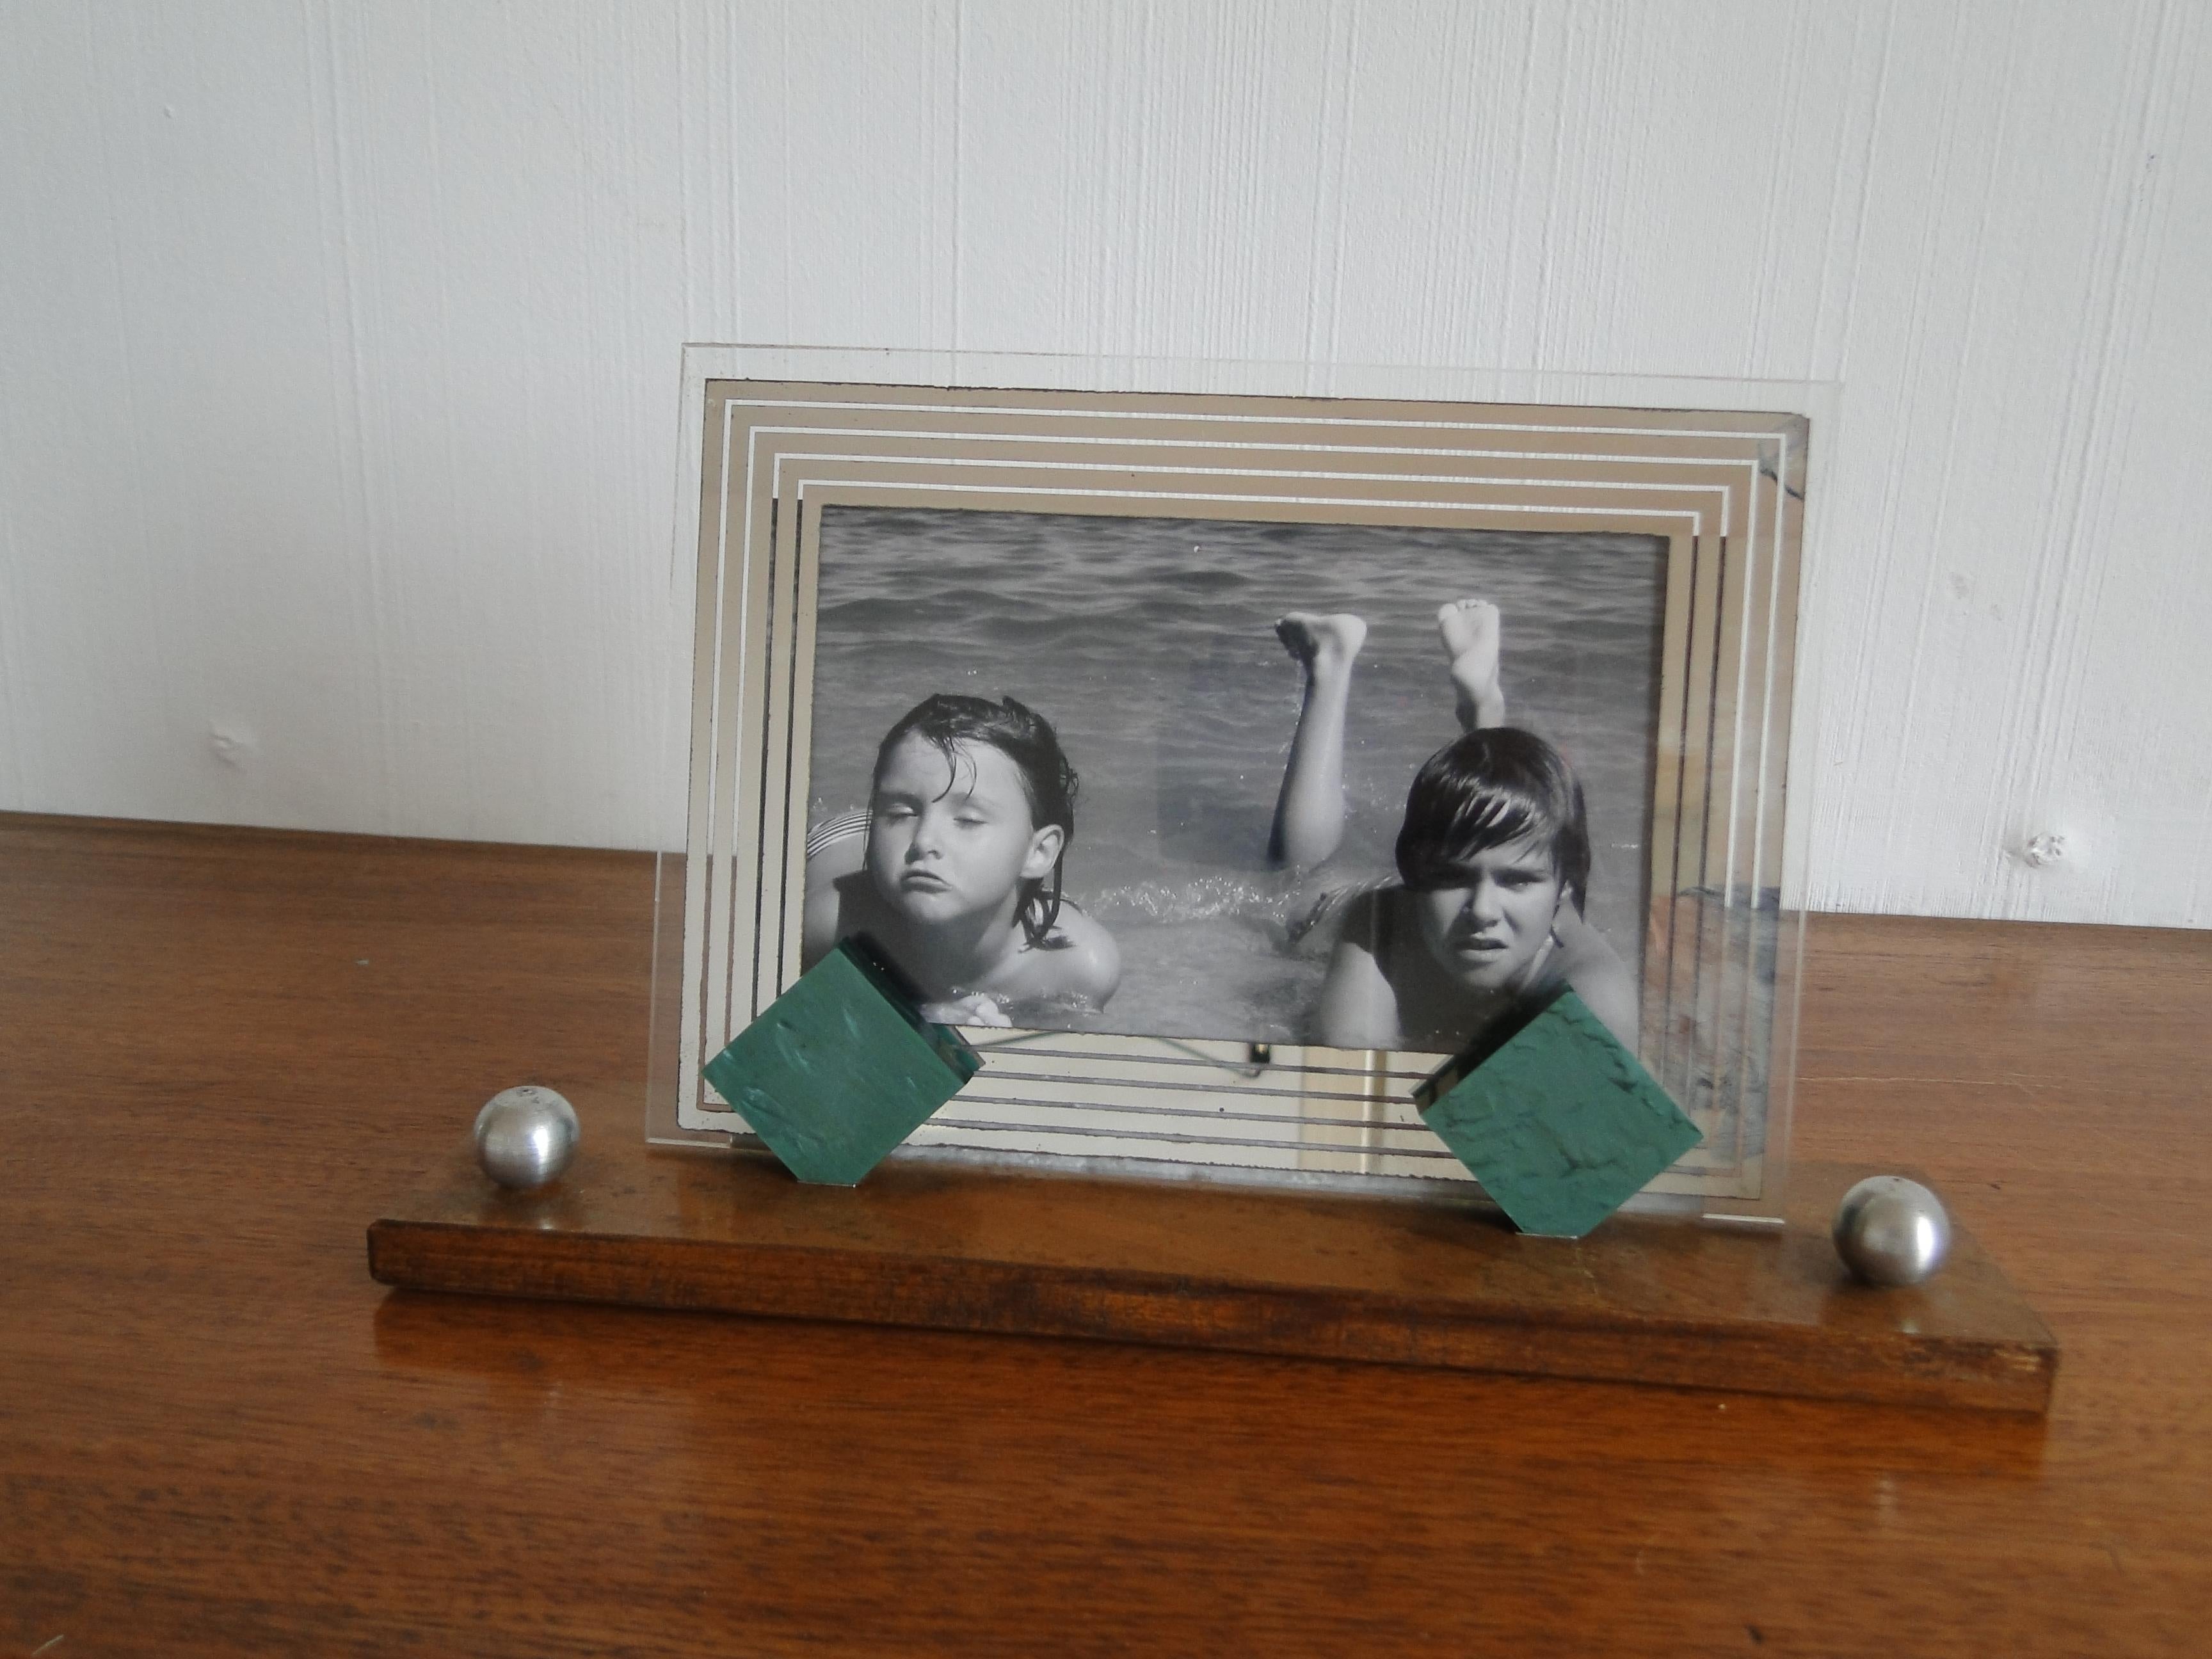 Mid-20th Century Art Deco Modernist Picture Photo Frame Wood, Bakelite and Chrome Ball Accents For Sale